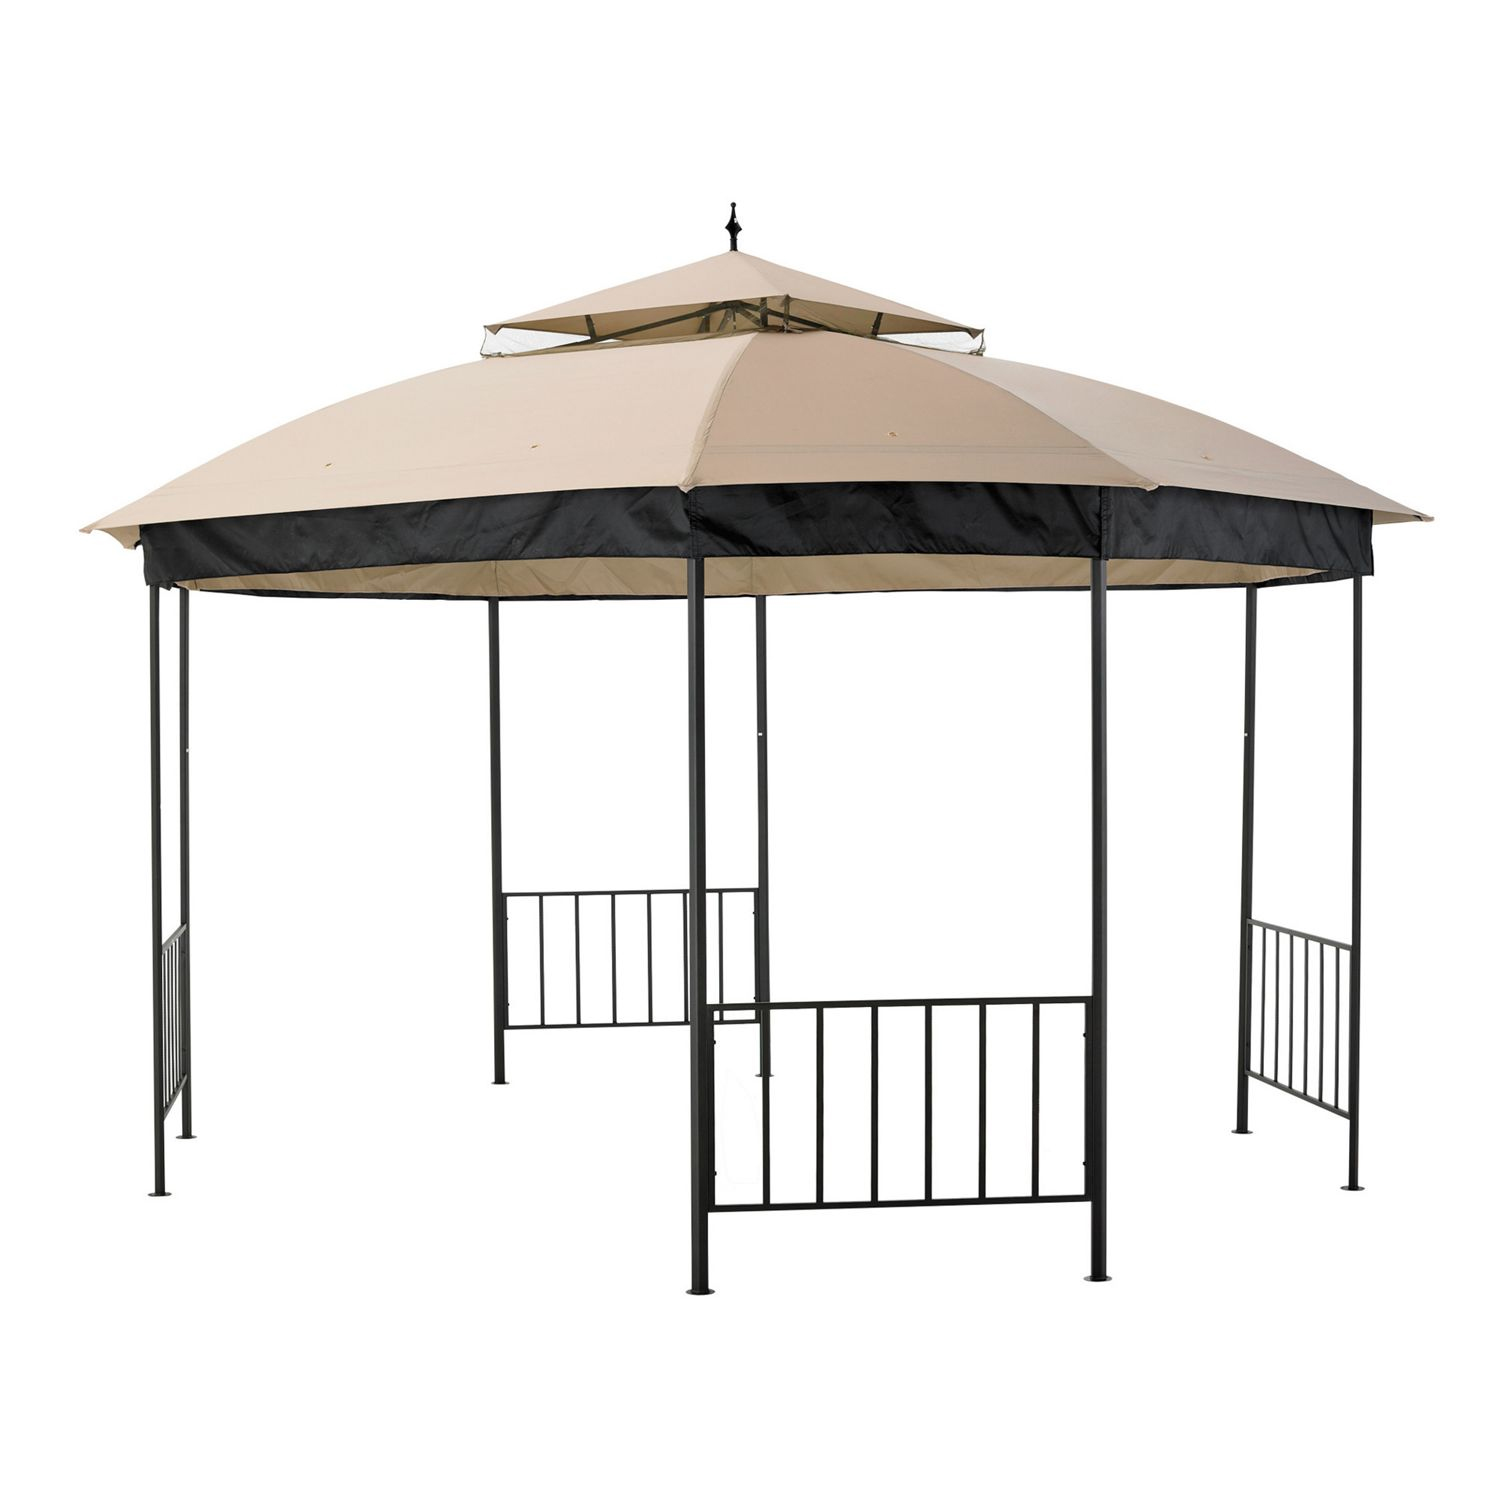 Replacement Canopy for CT Octagon Gazebo - RipLock 350